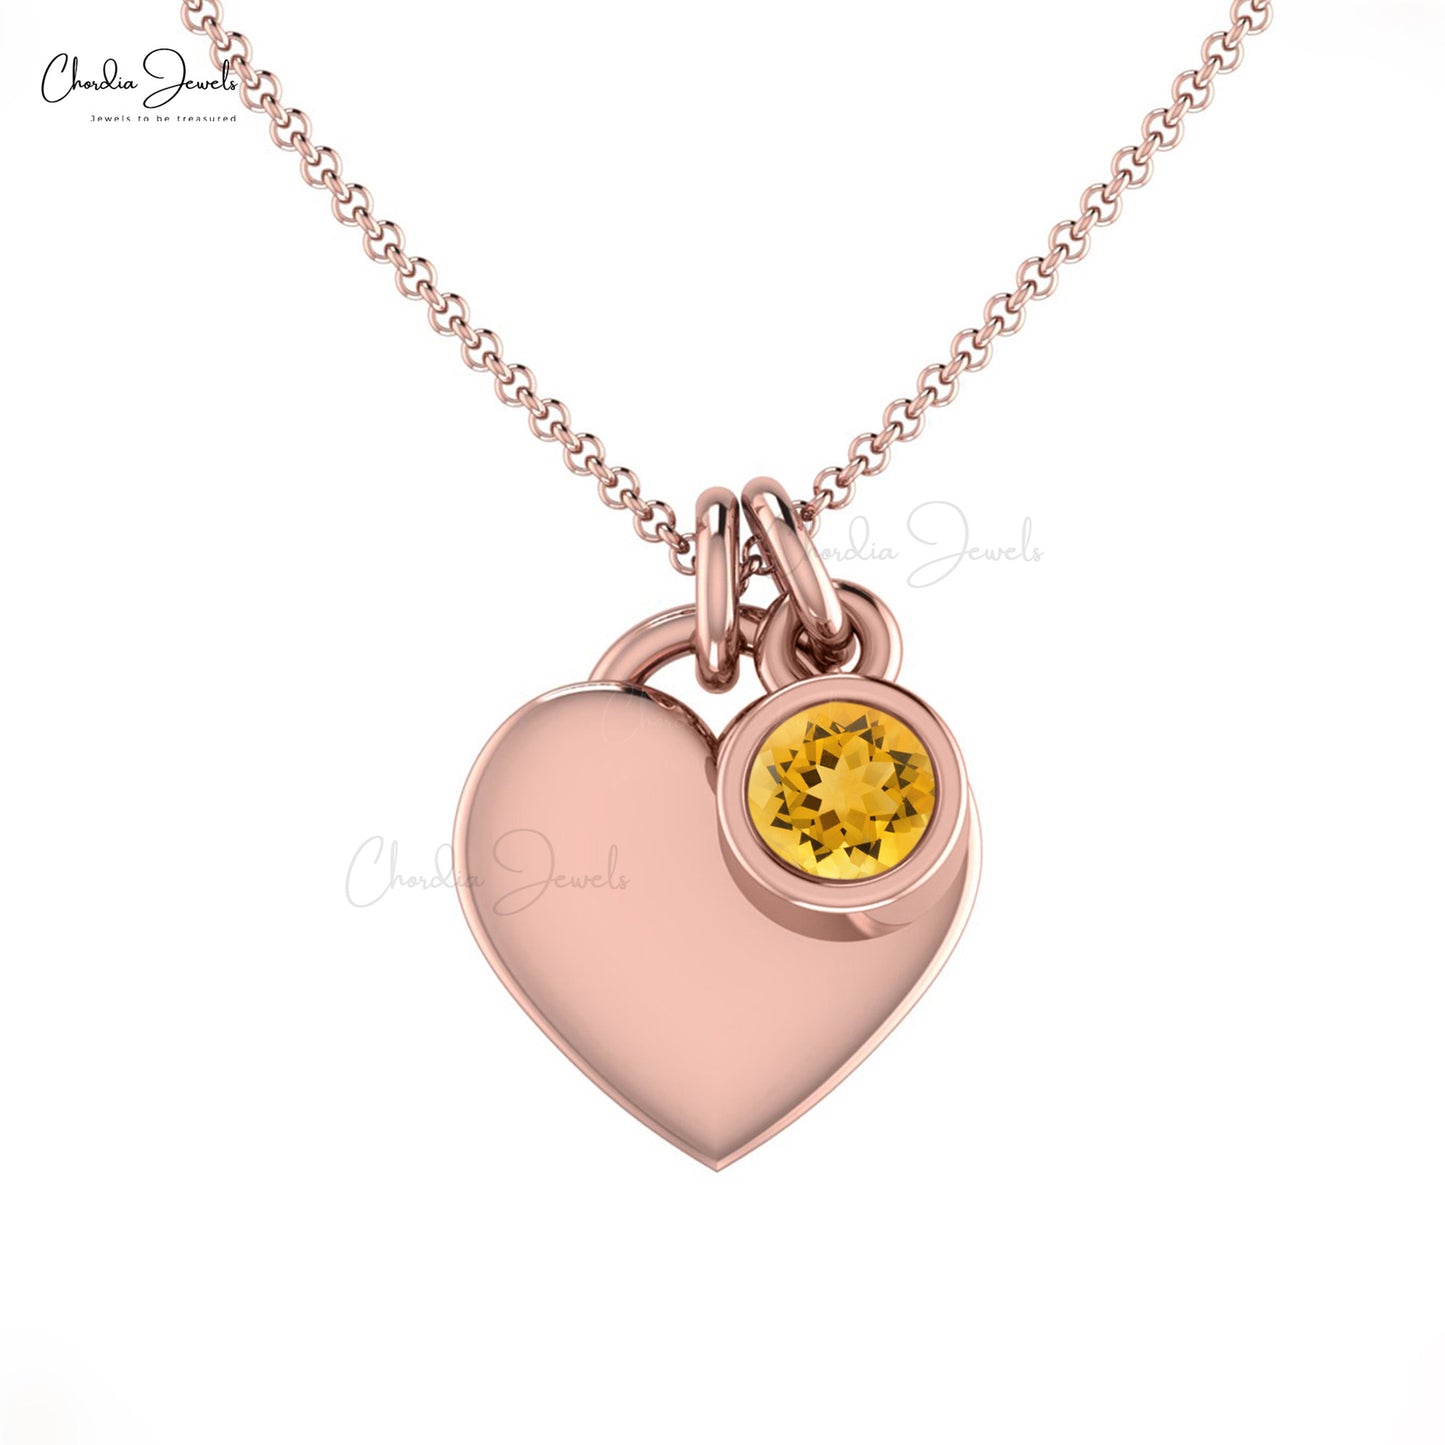 Load image into Gallery viewer, Natural Citrine Necklace, 3mm Round Gemstone Heart Shape Necklace, 14k Solid Gold November Birthstone Necklace, Anniversary Gift for Her
